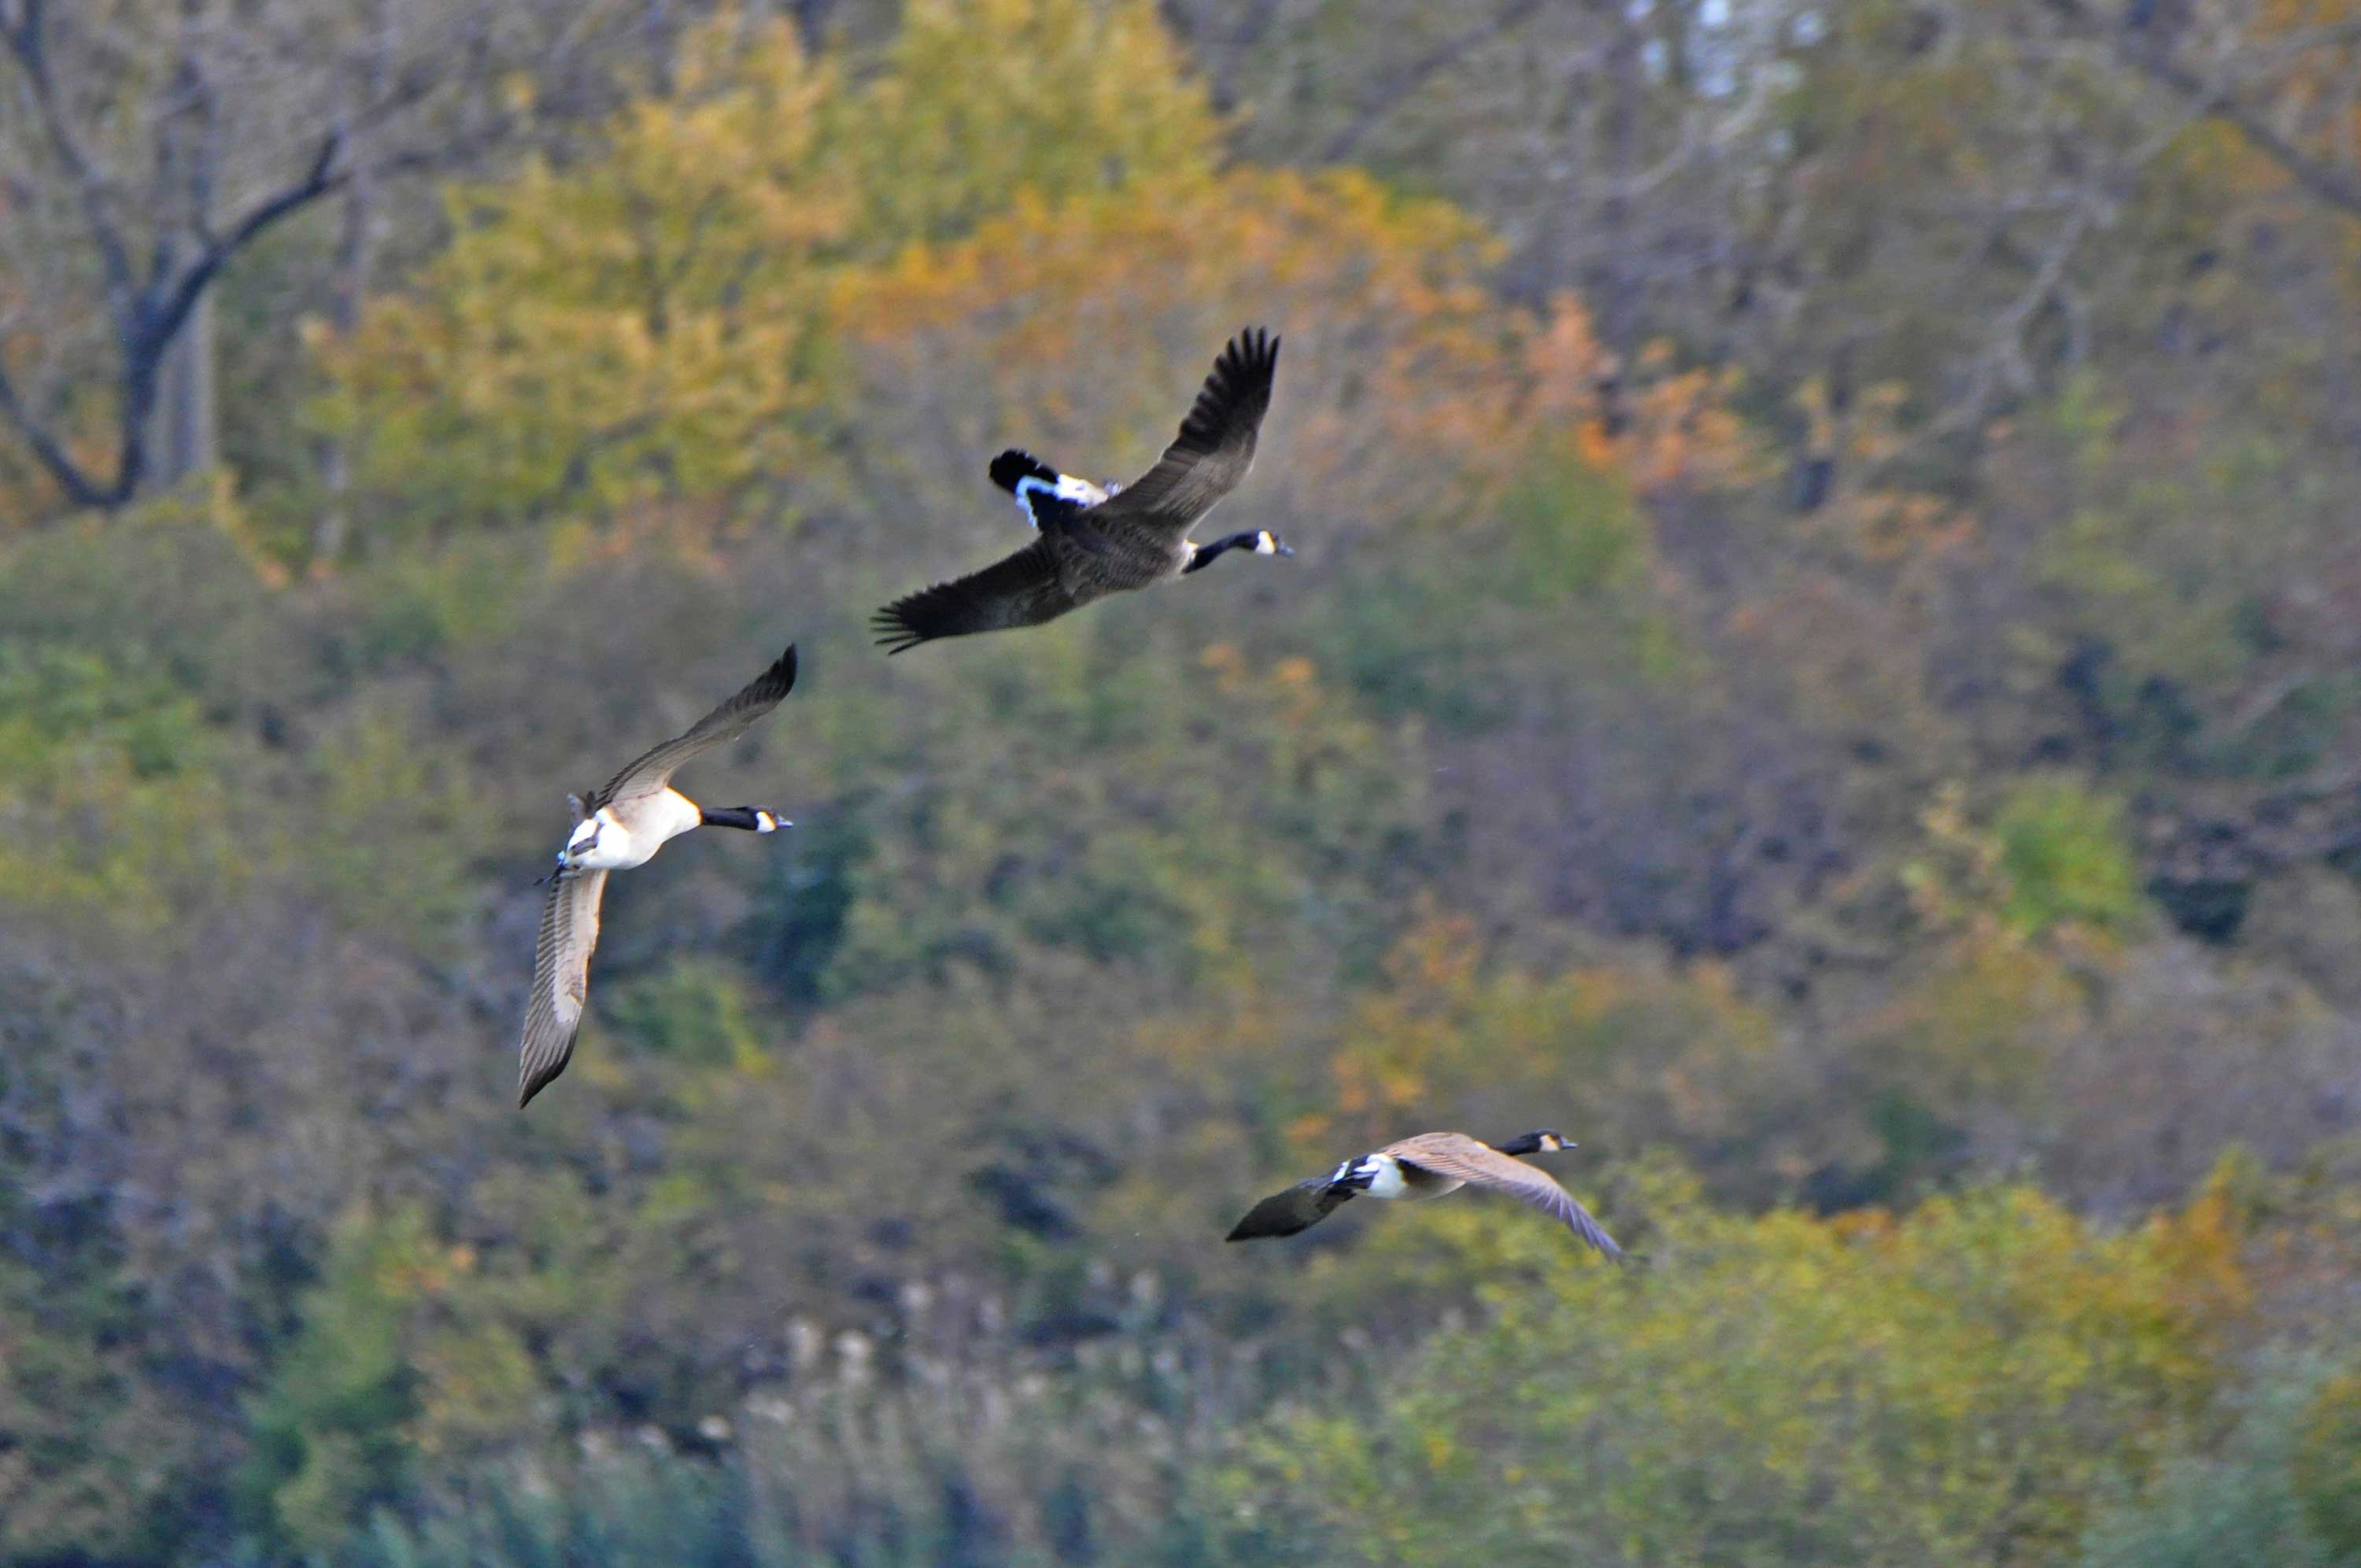 A Canada goose flying upside down.